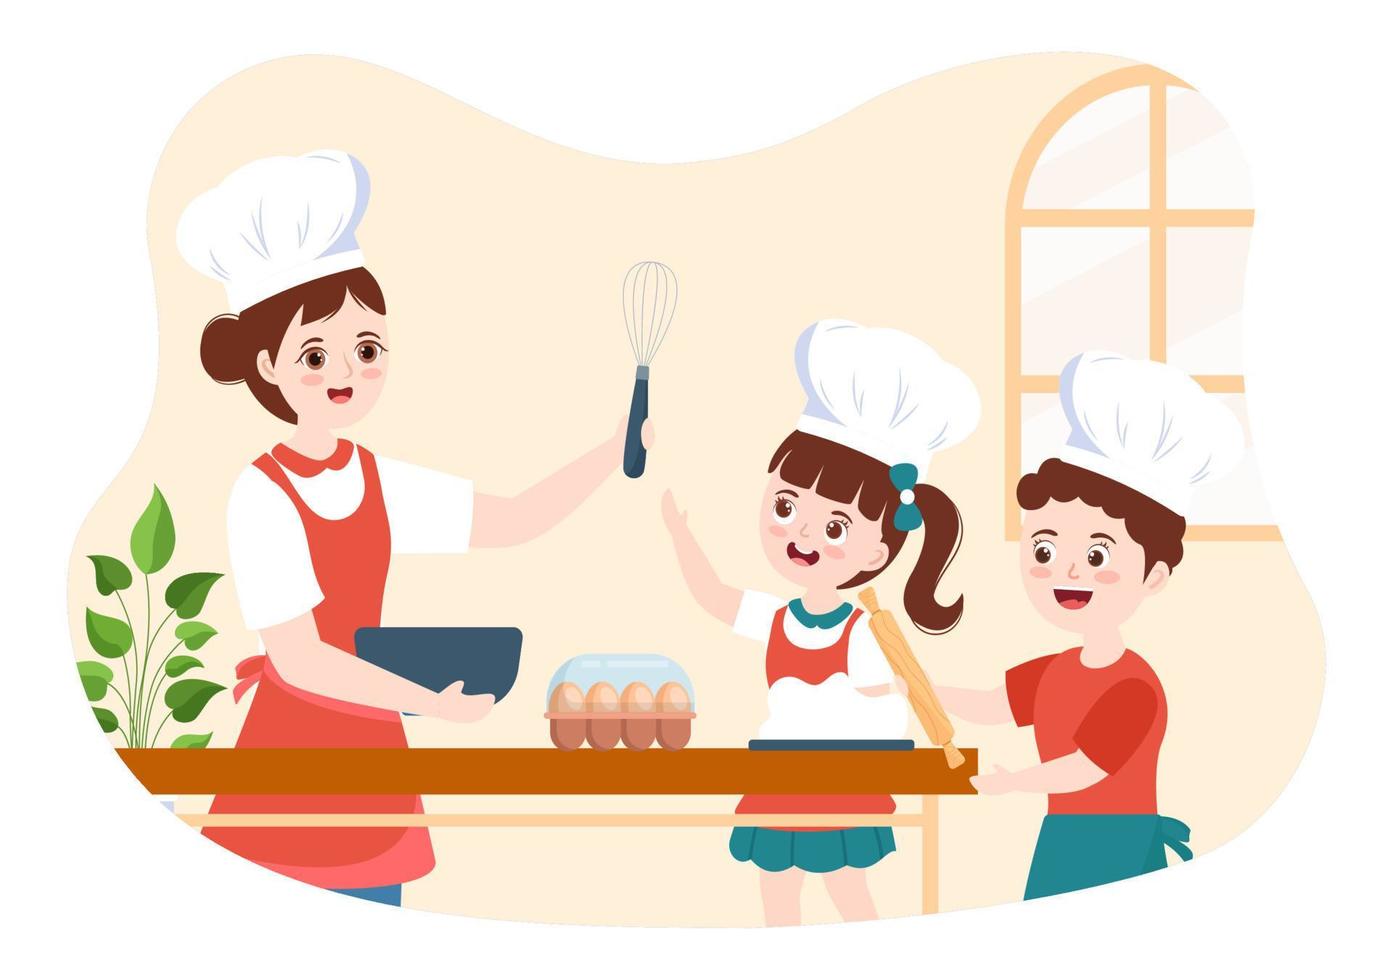 Cooking School With Kids and Teacher in a Class Learning to Learn Cooks Homemade Food on Flat Cartoon Hand Drawn Templates Illustration vector